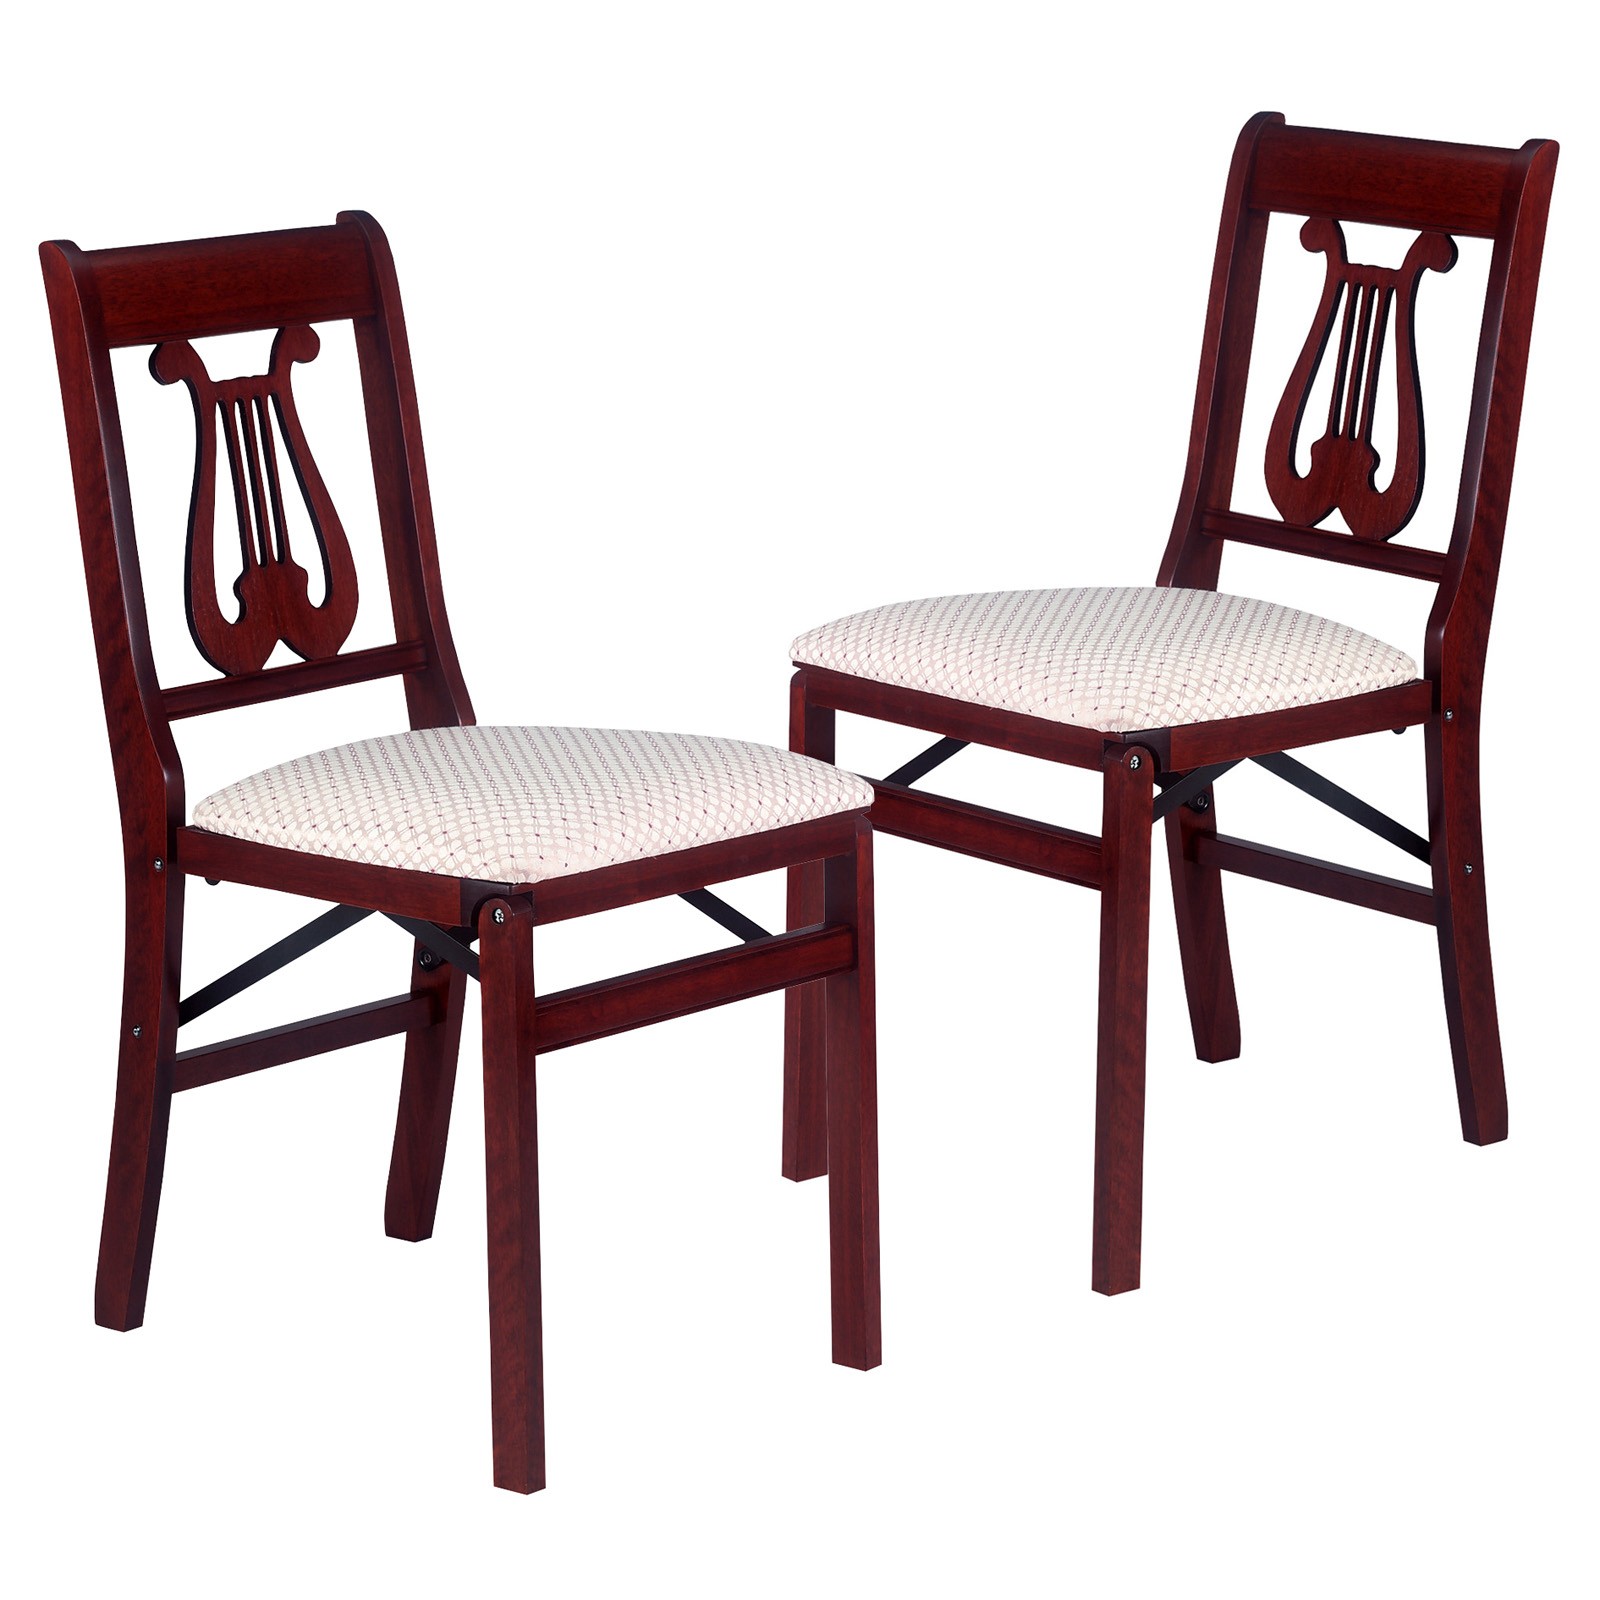 Stakmore music back wood folding chairs set of 2